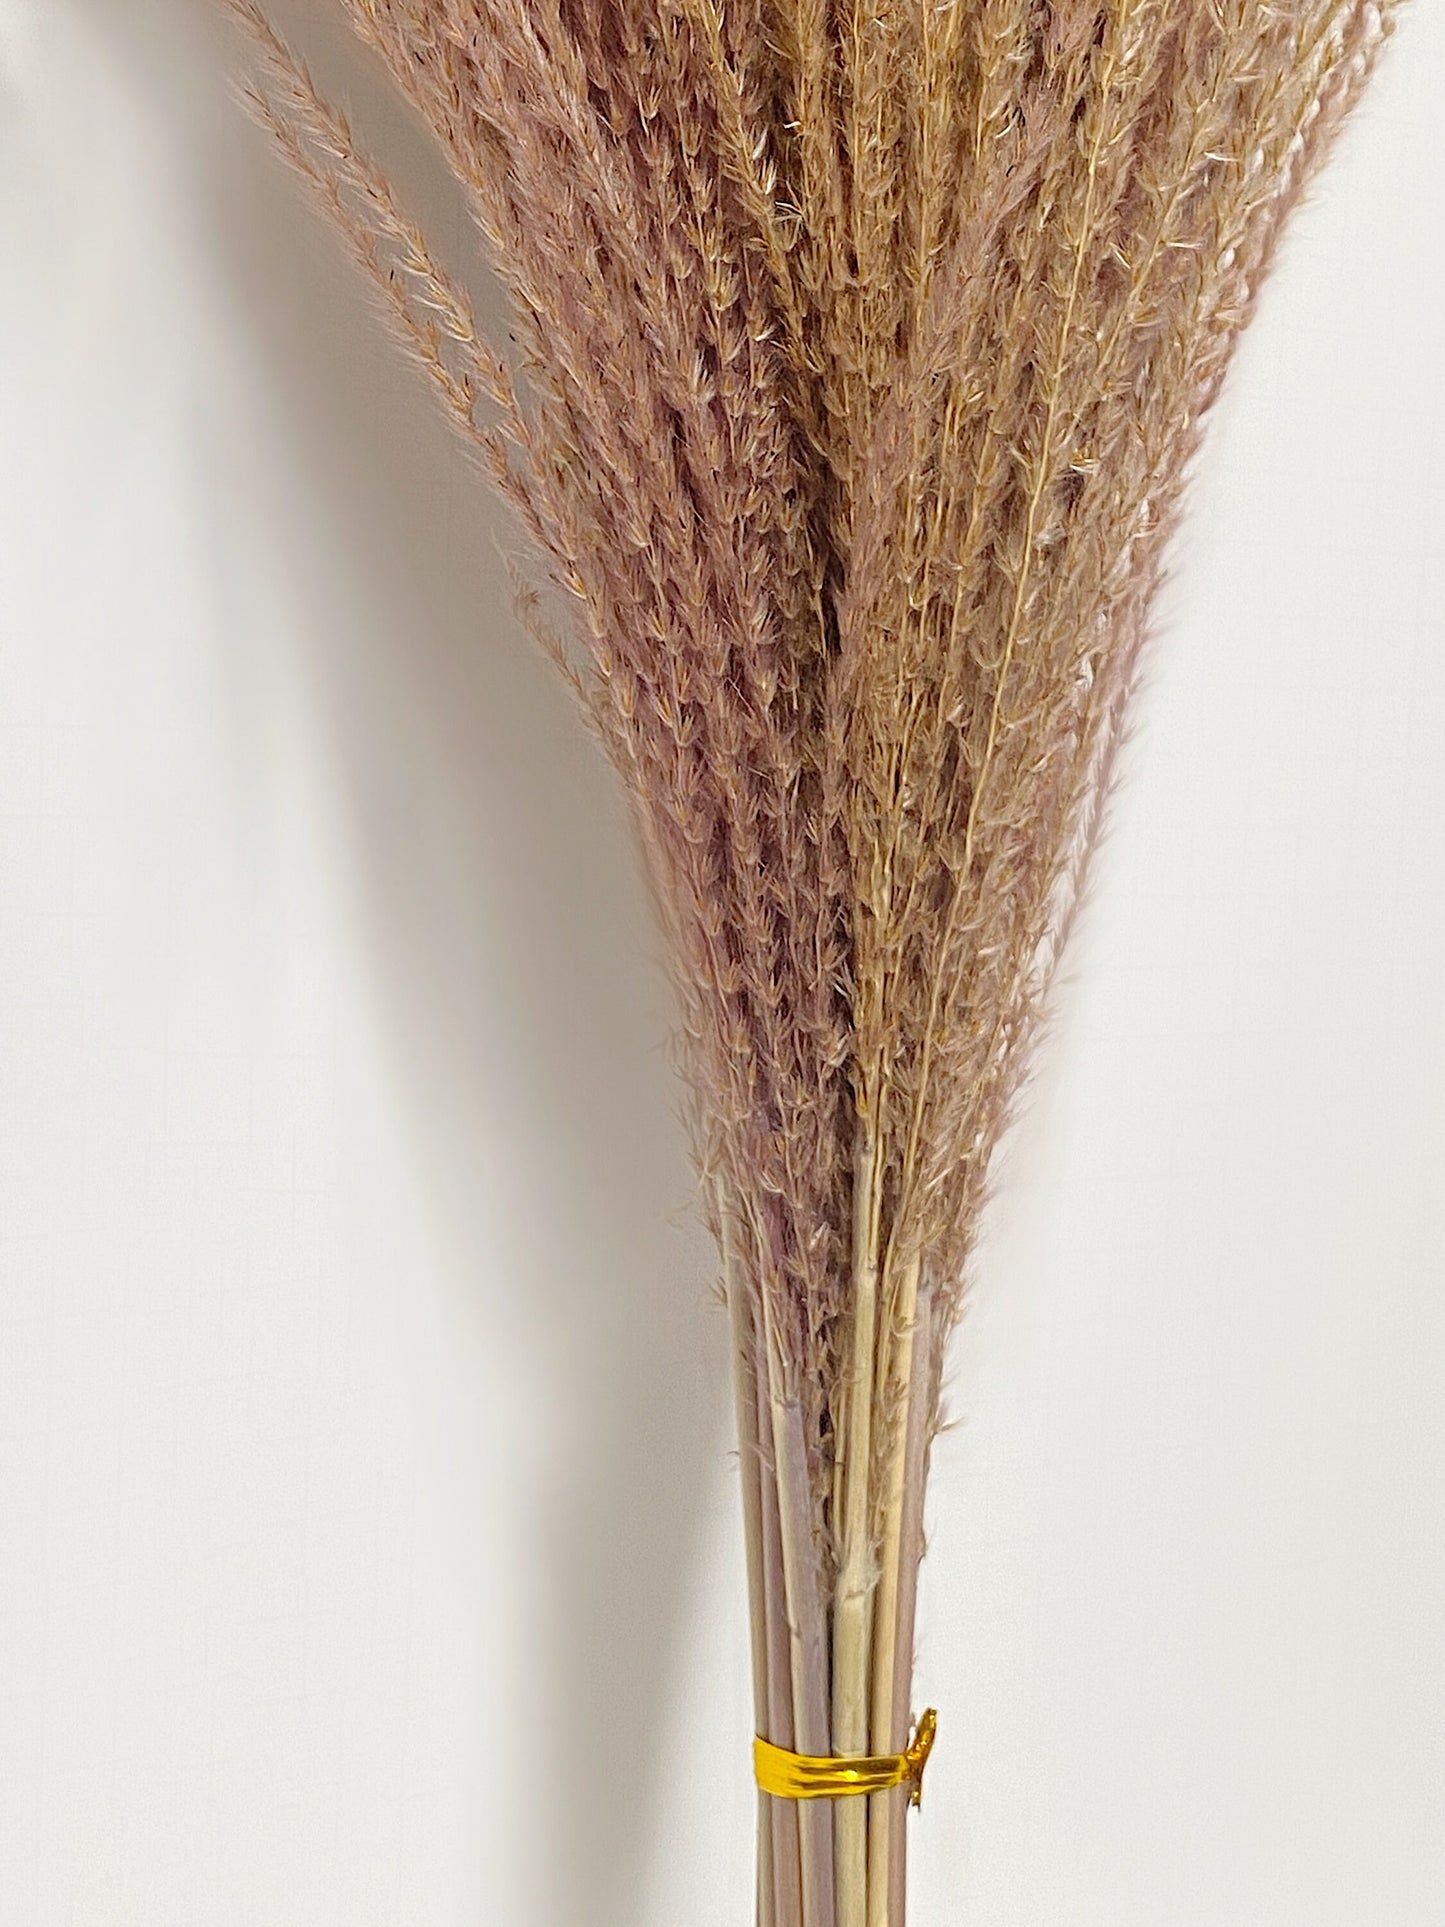 Pampas Grass Horsetail Whisk, Preserved Flowers, House Decor, Wedding, Pampas, Fluffy, Natural, Fall, Feather, Wheats and Grass, Short, Long